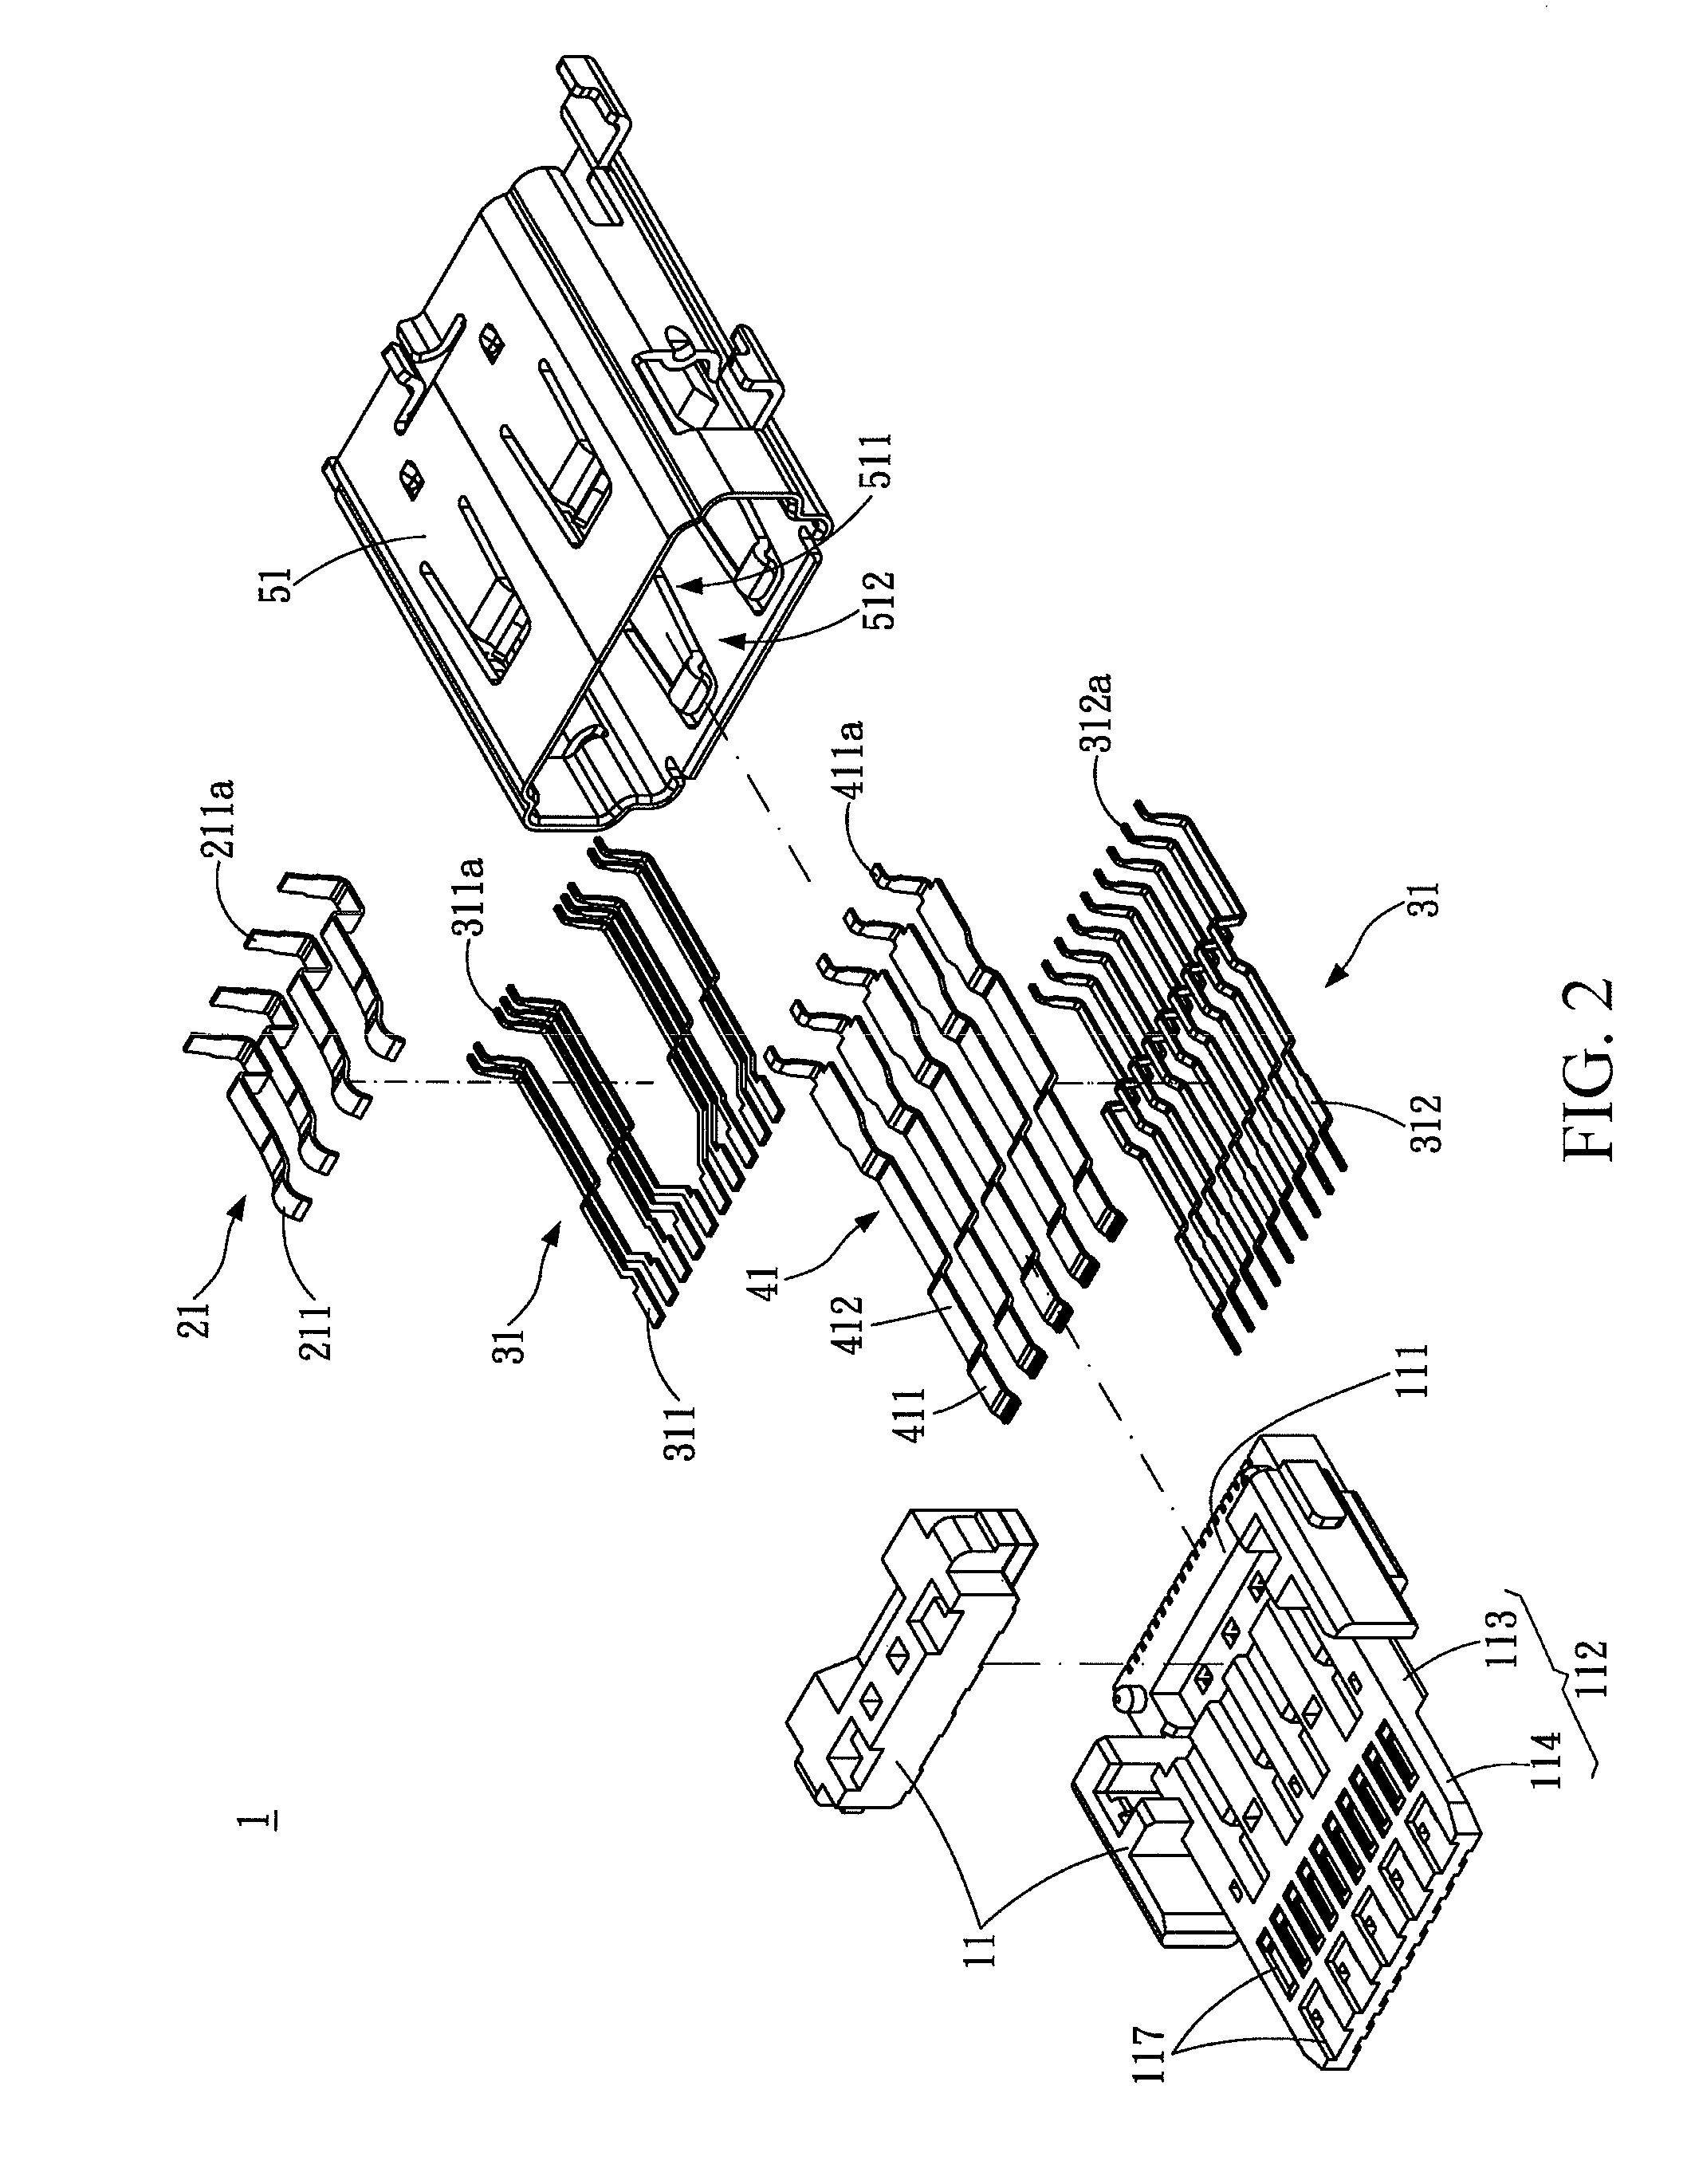 Electrical connector socket capable of transmitting different signals